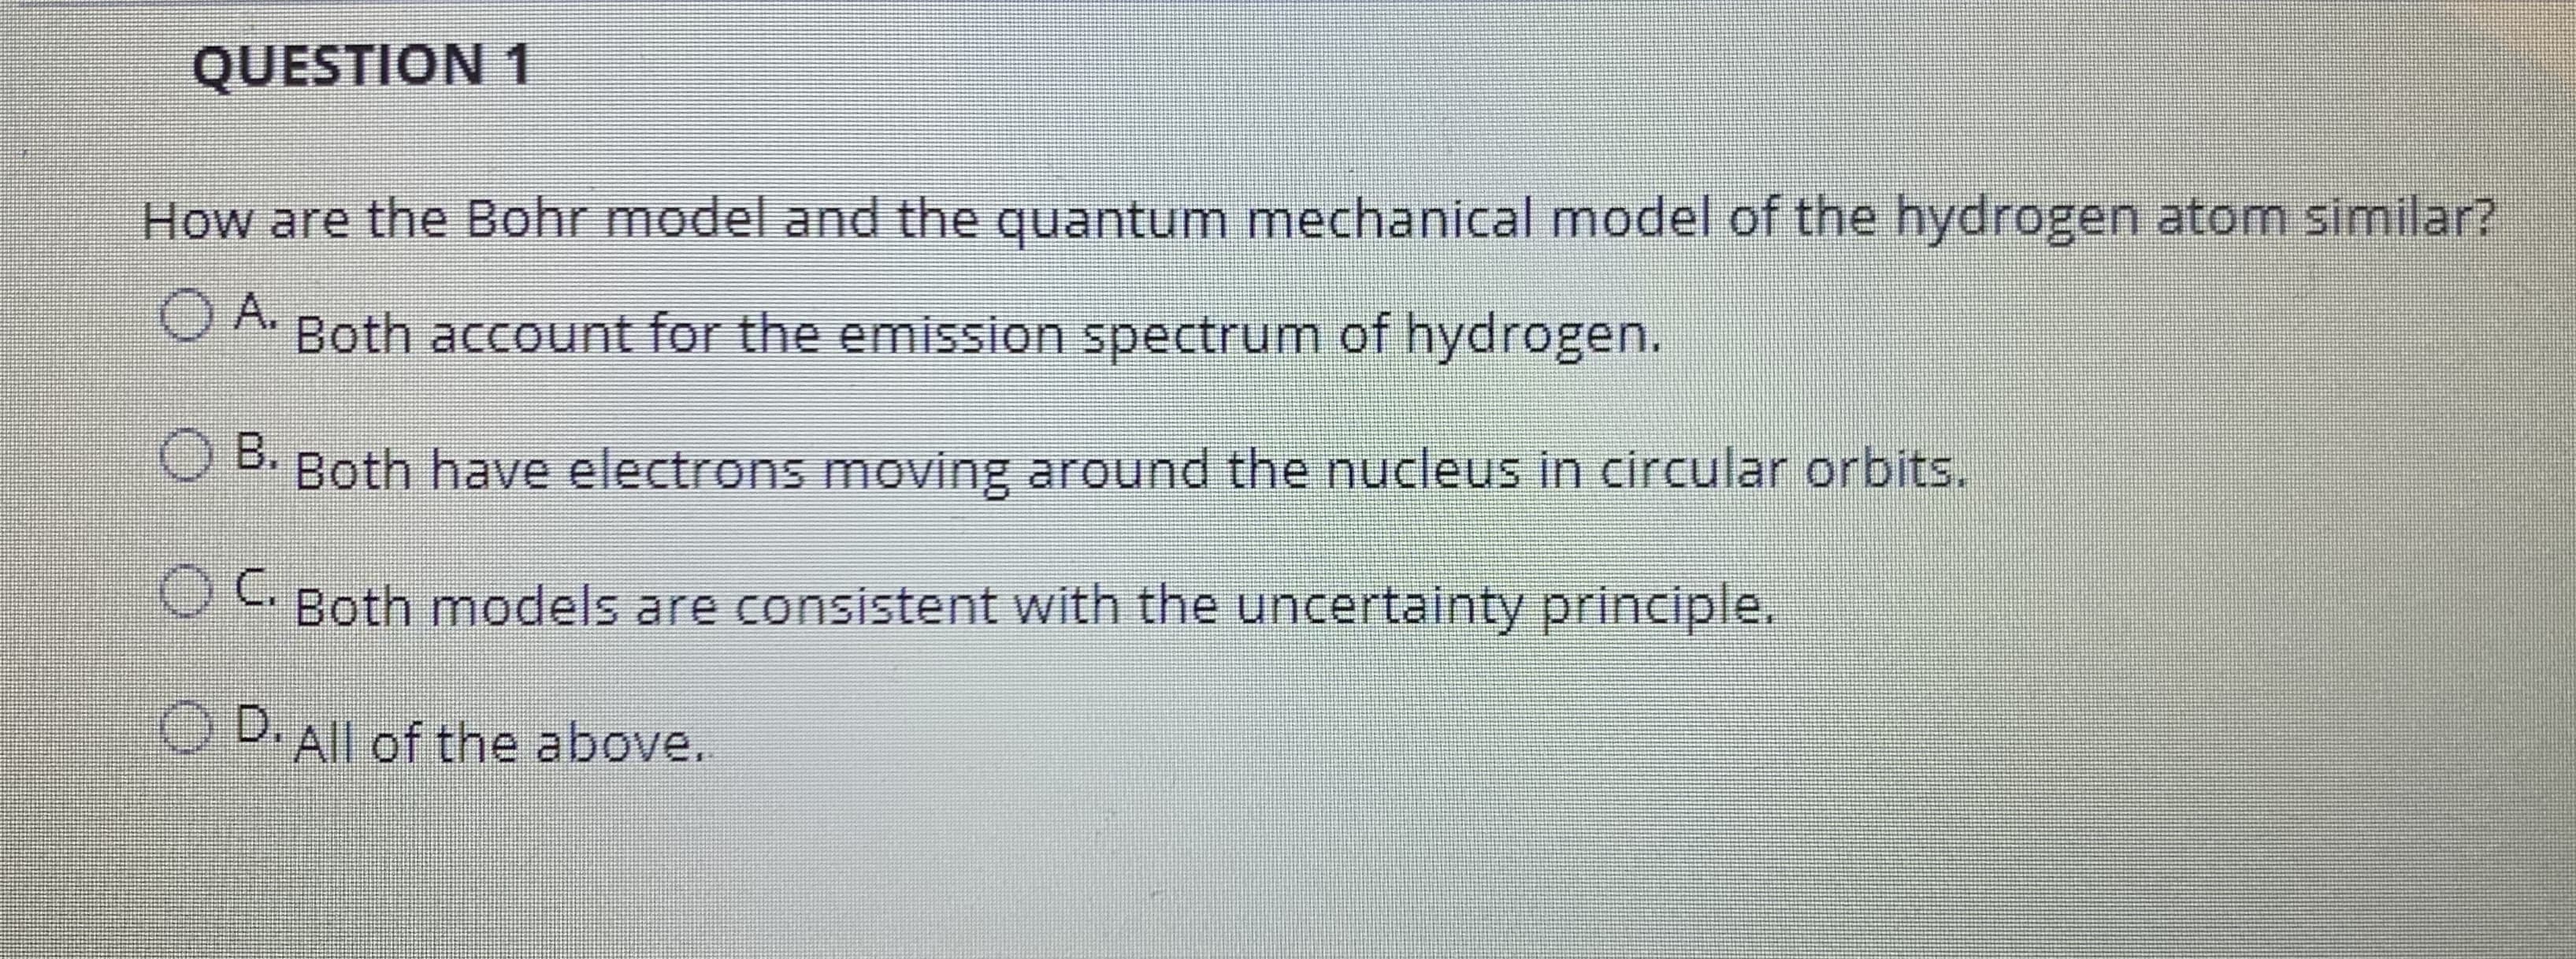 How are the Bohr model and the quantum mechanical model of the hydrogen atom similar?
OA.
O A. Both account for the emission spectrum of hydrogen.
B.
OB Both have electrons moving around the nucleus in circular orbits.
OC.
C Both models are consistent with the uncertainty principle.
